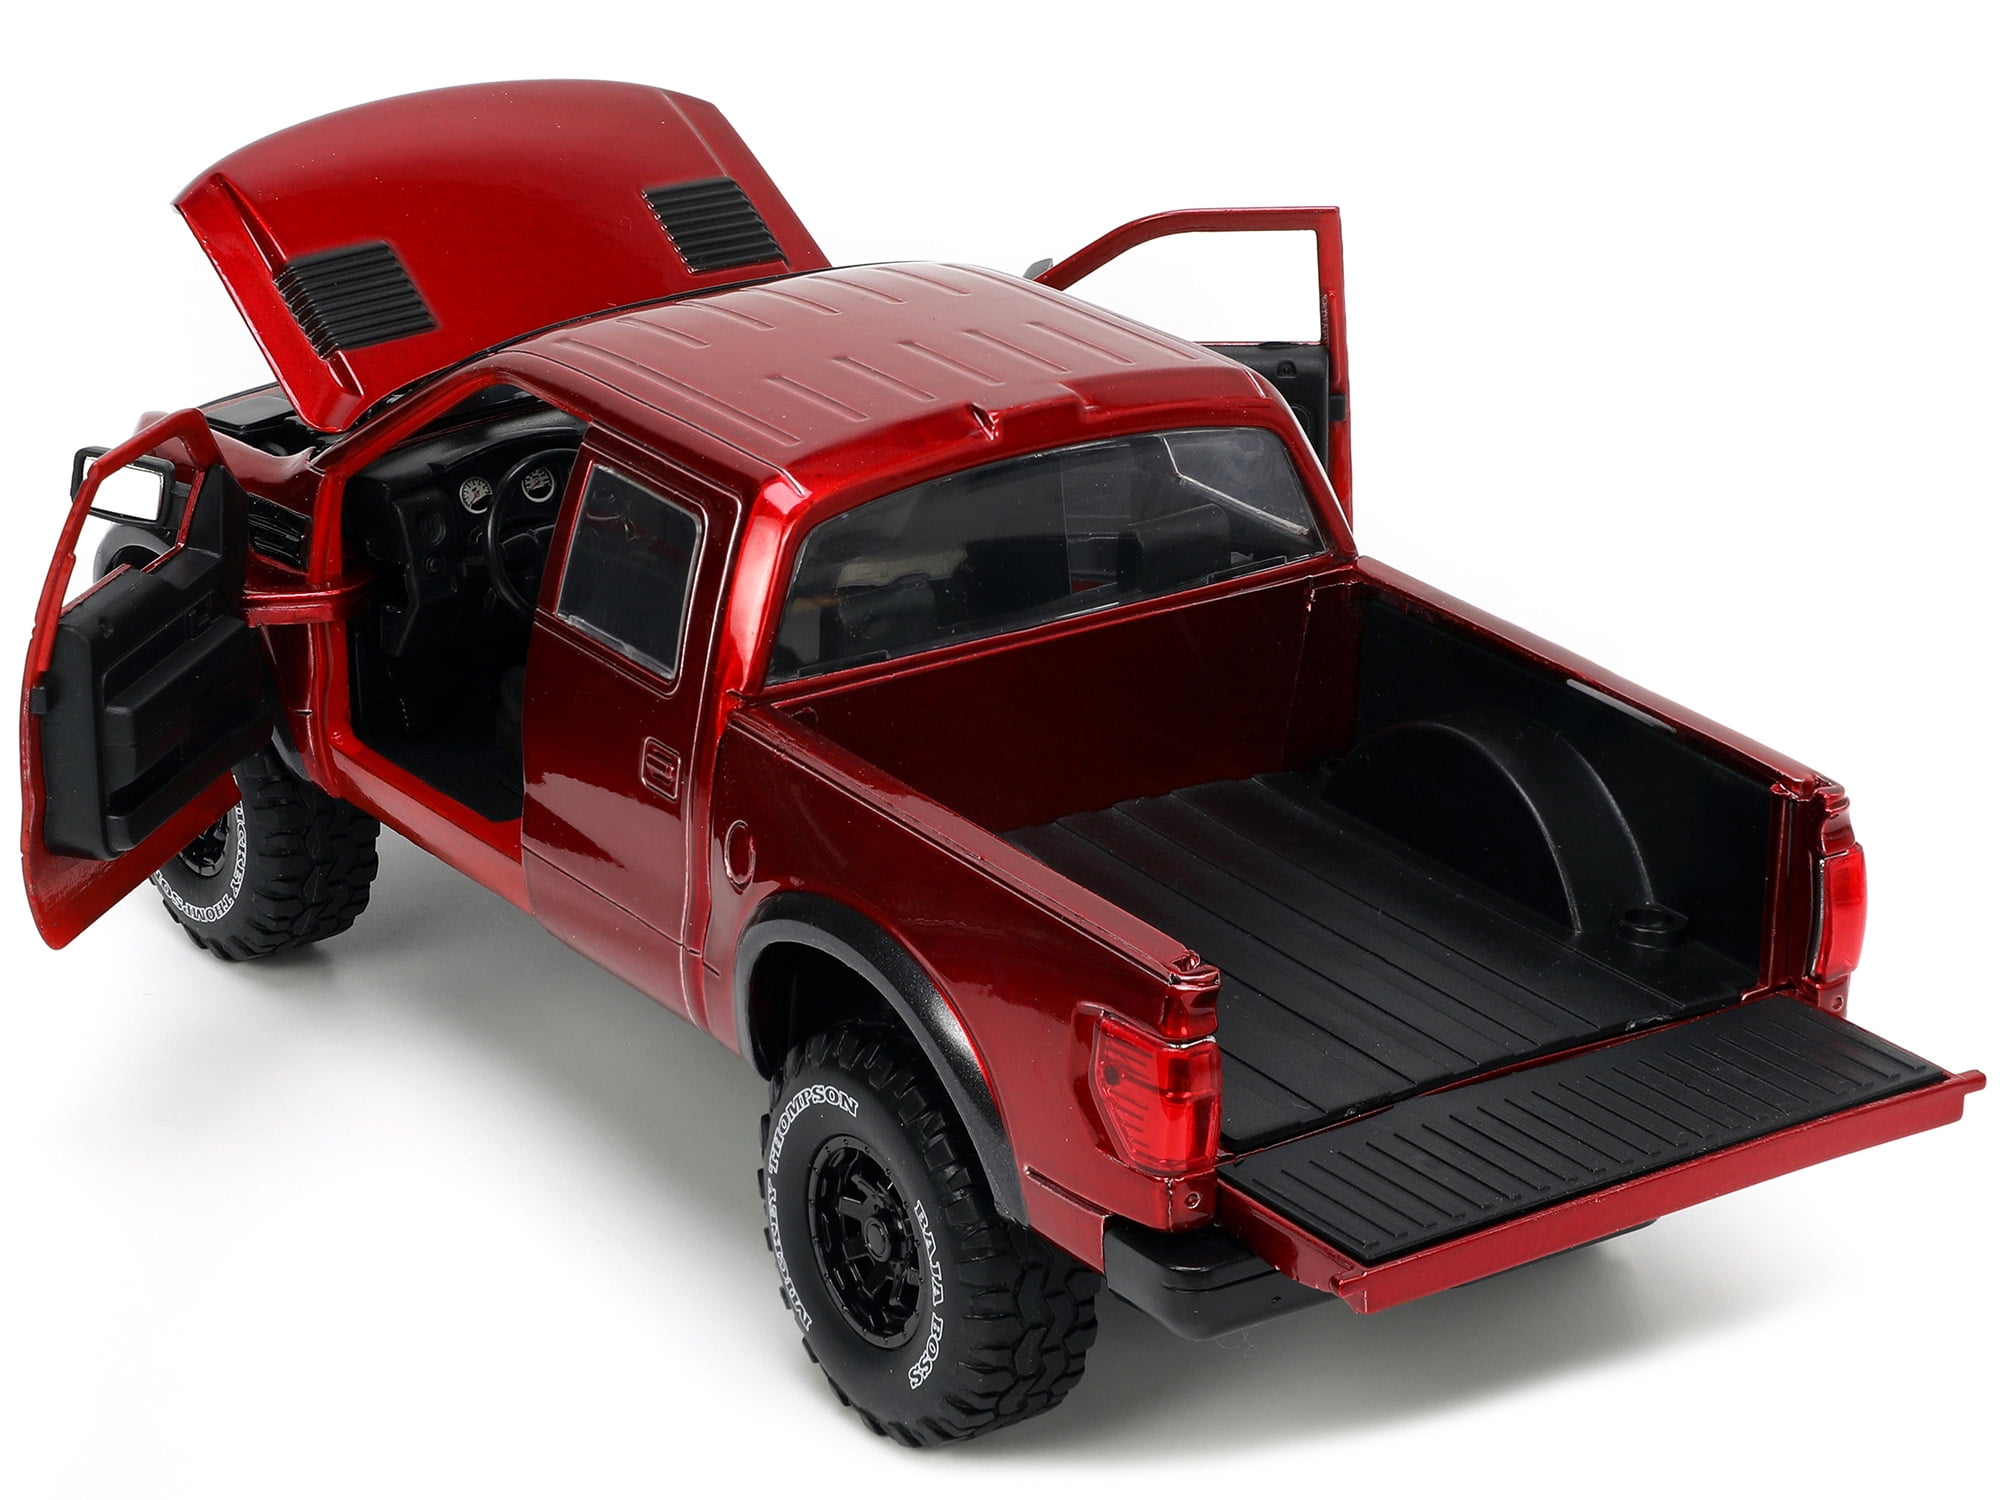 2011 Ford F-150 SVT Raptor Pickup Truck Candy Red Metallic 